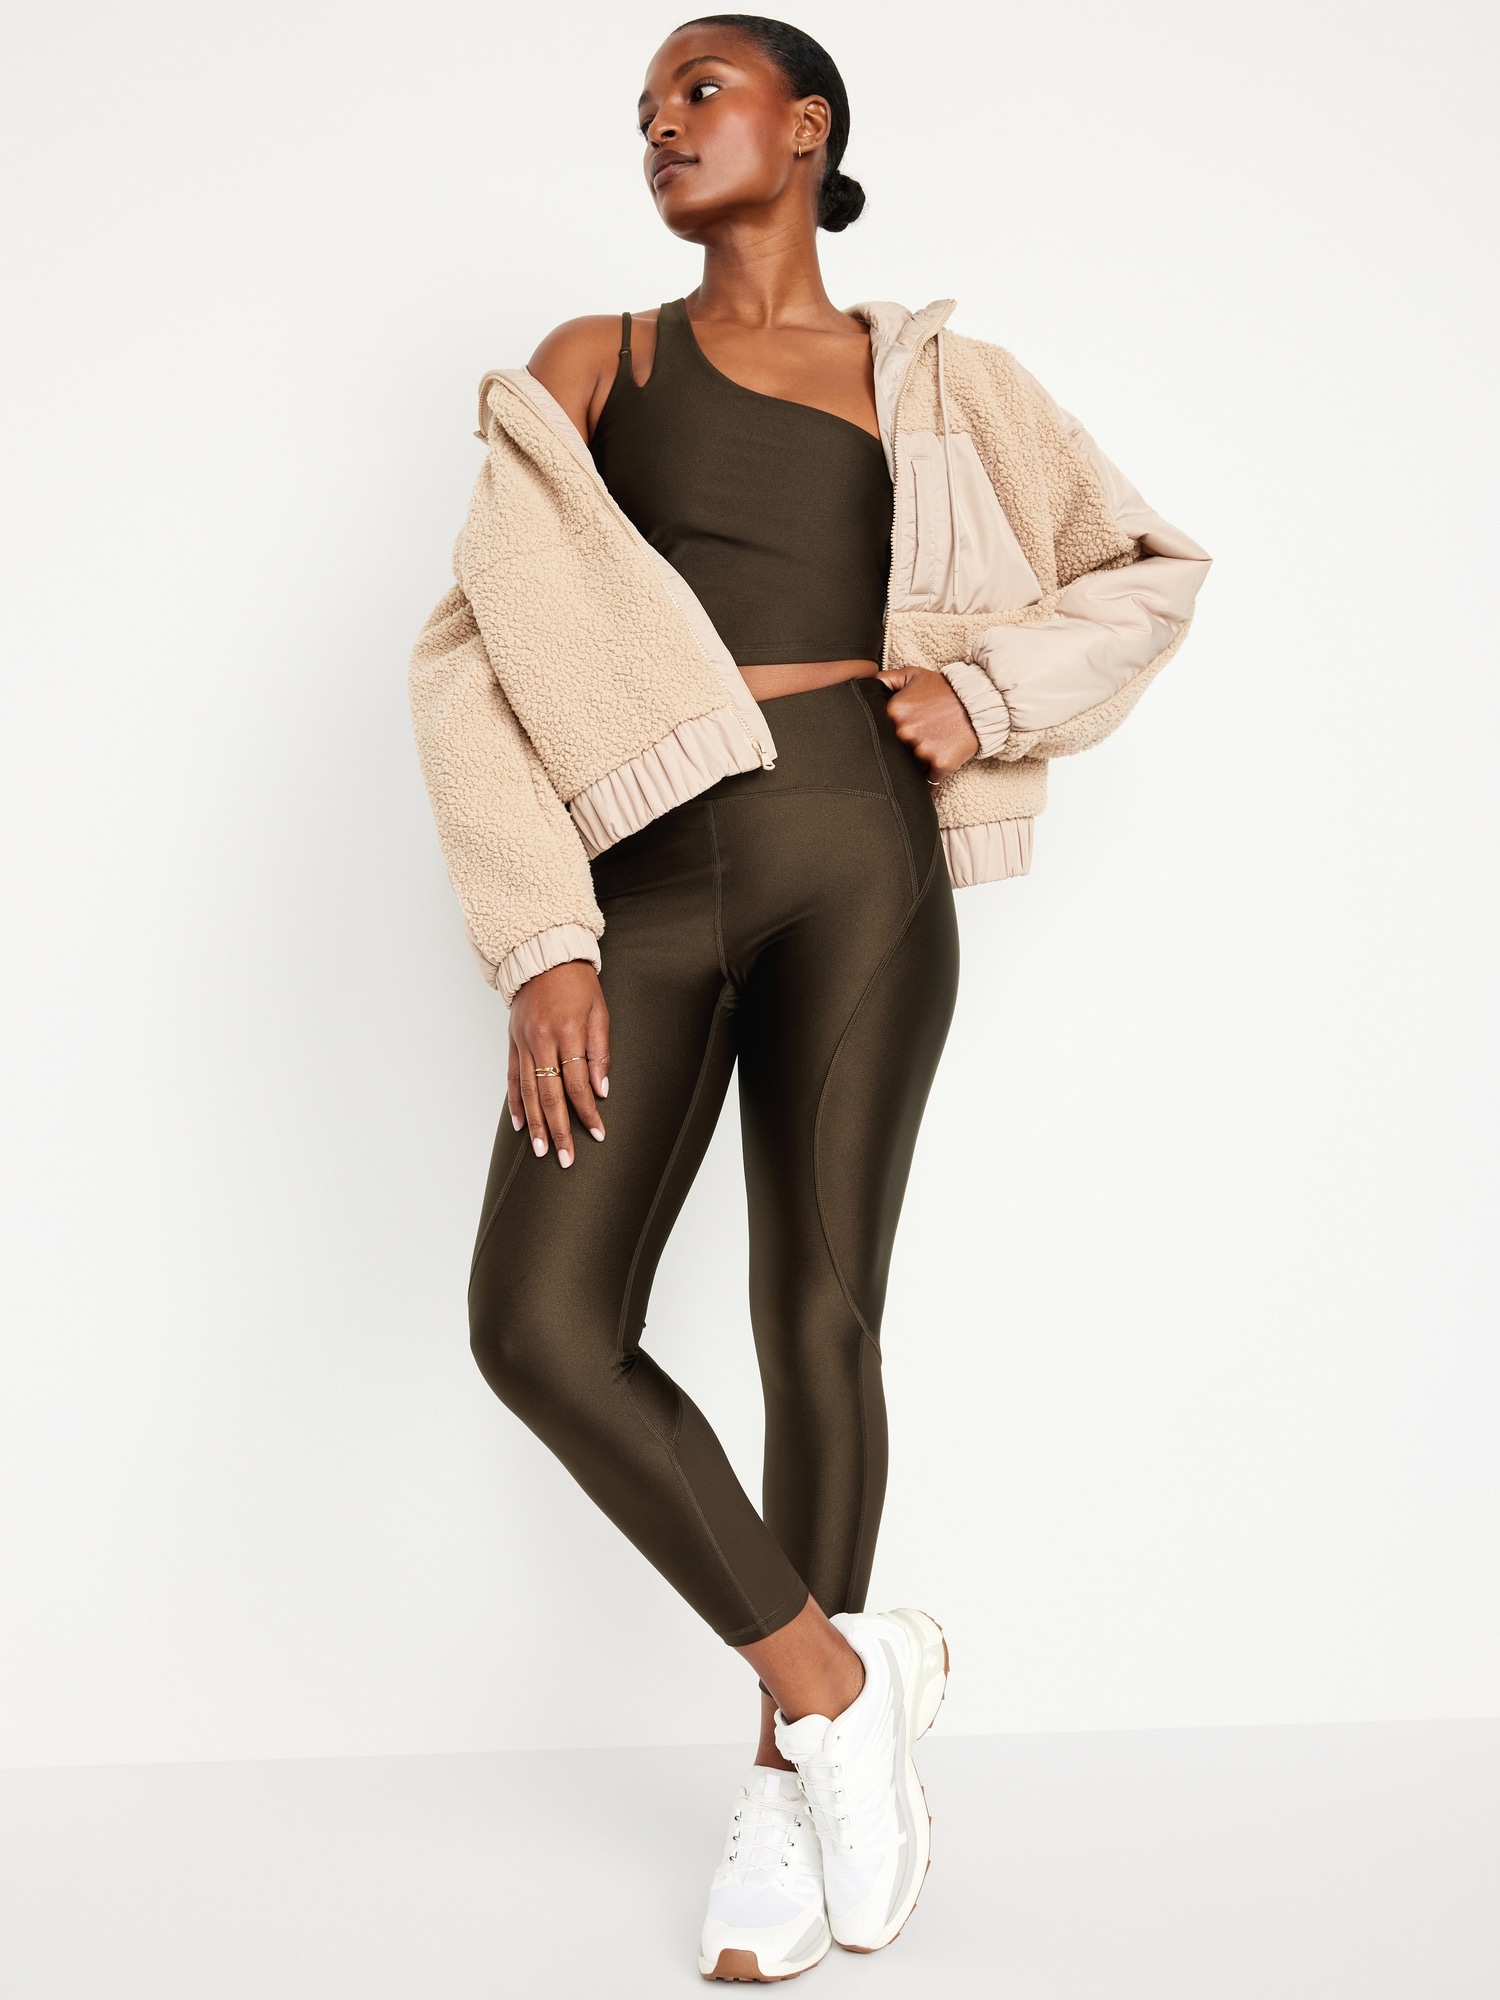 Old Navy High-Waisted PowerSoft Leggings - ShopStyle